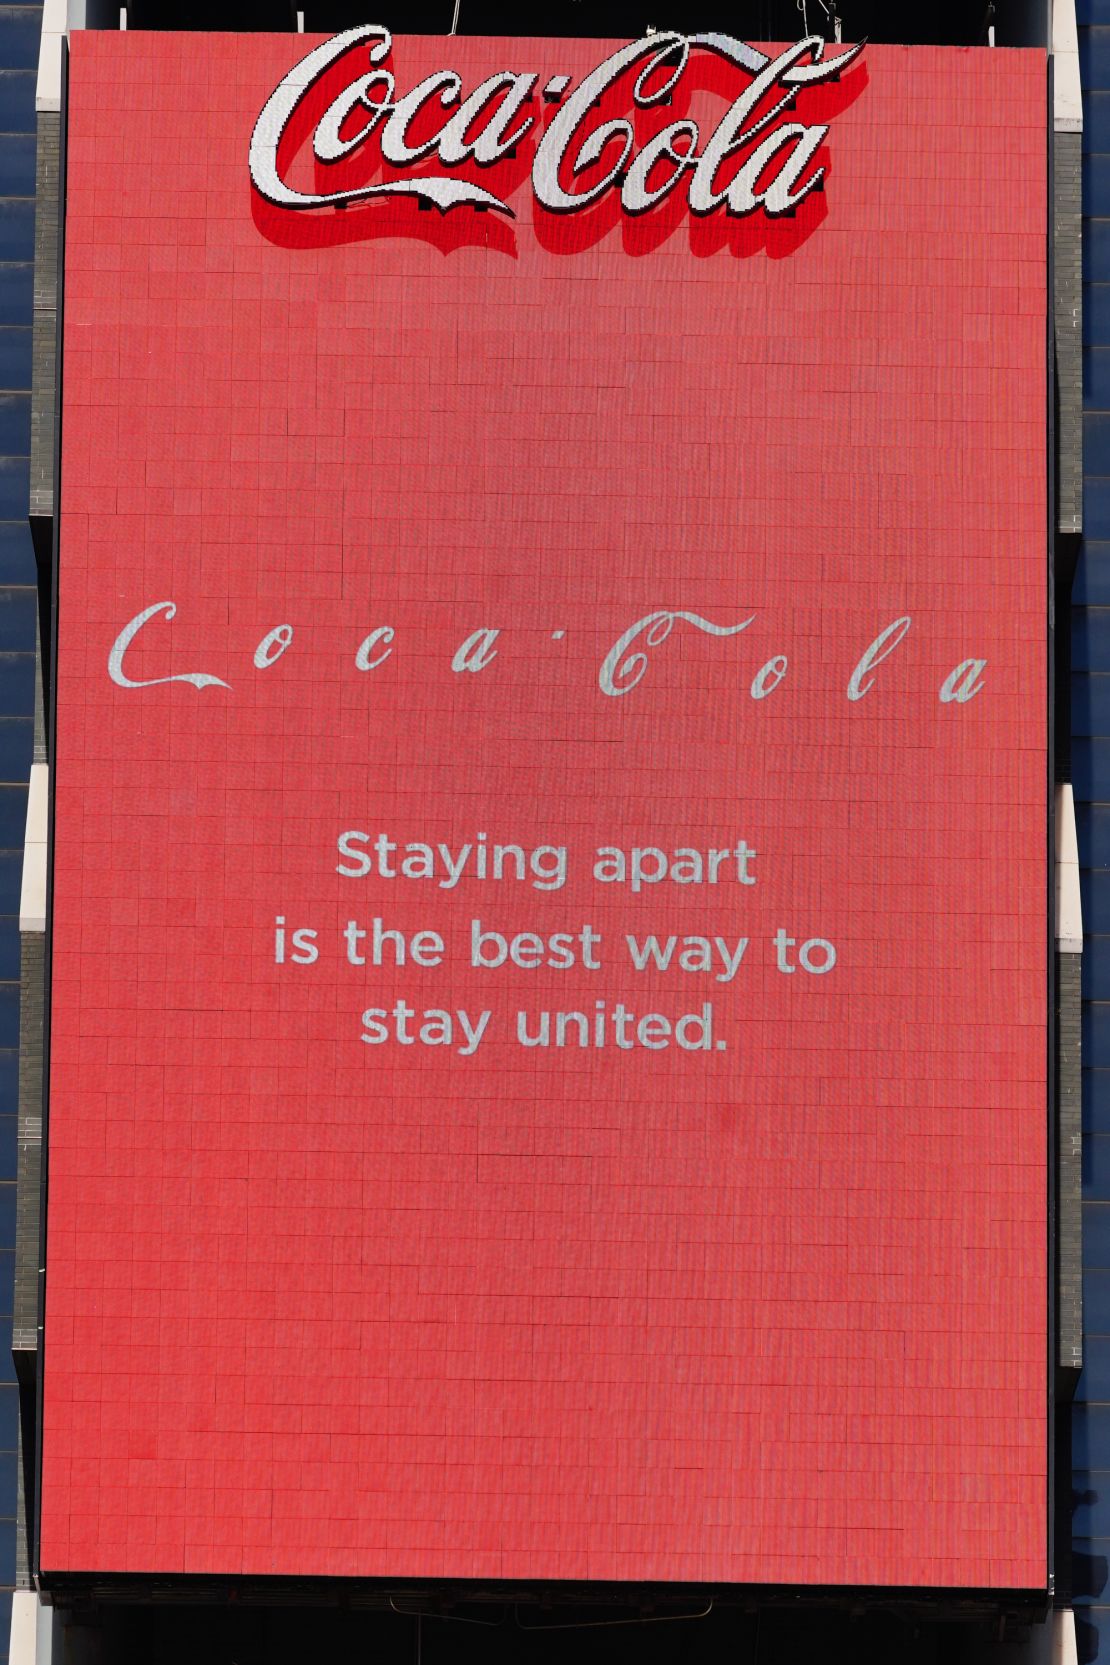 Coca-Cola's billboard in Times Square is promoting "Social Distancing" amid the coronavirus outbreak.